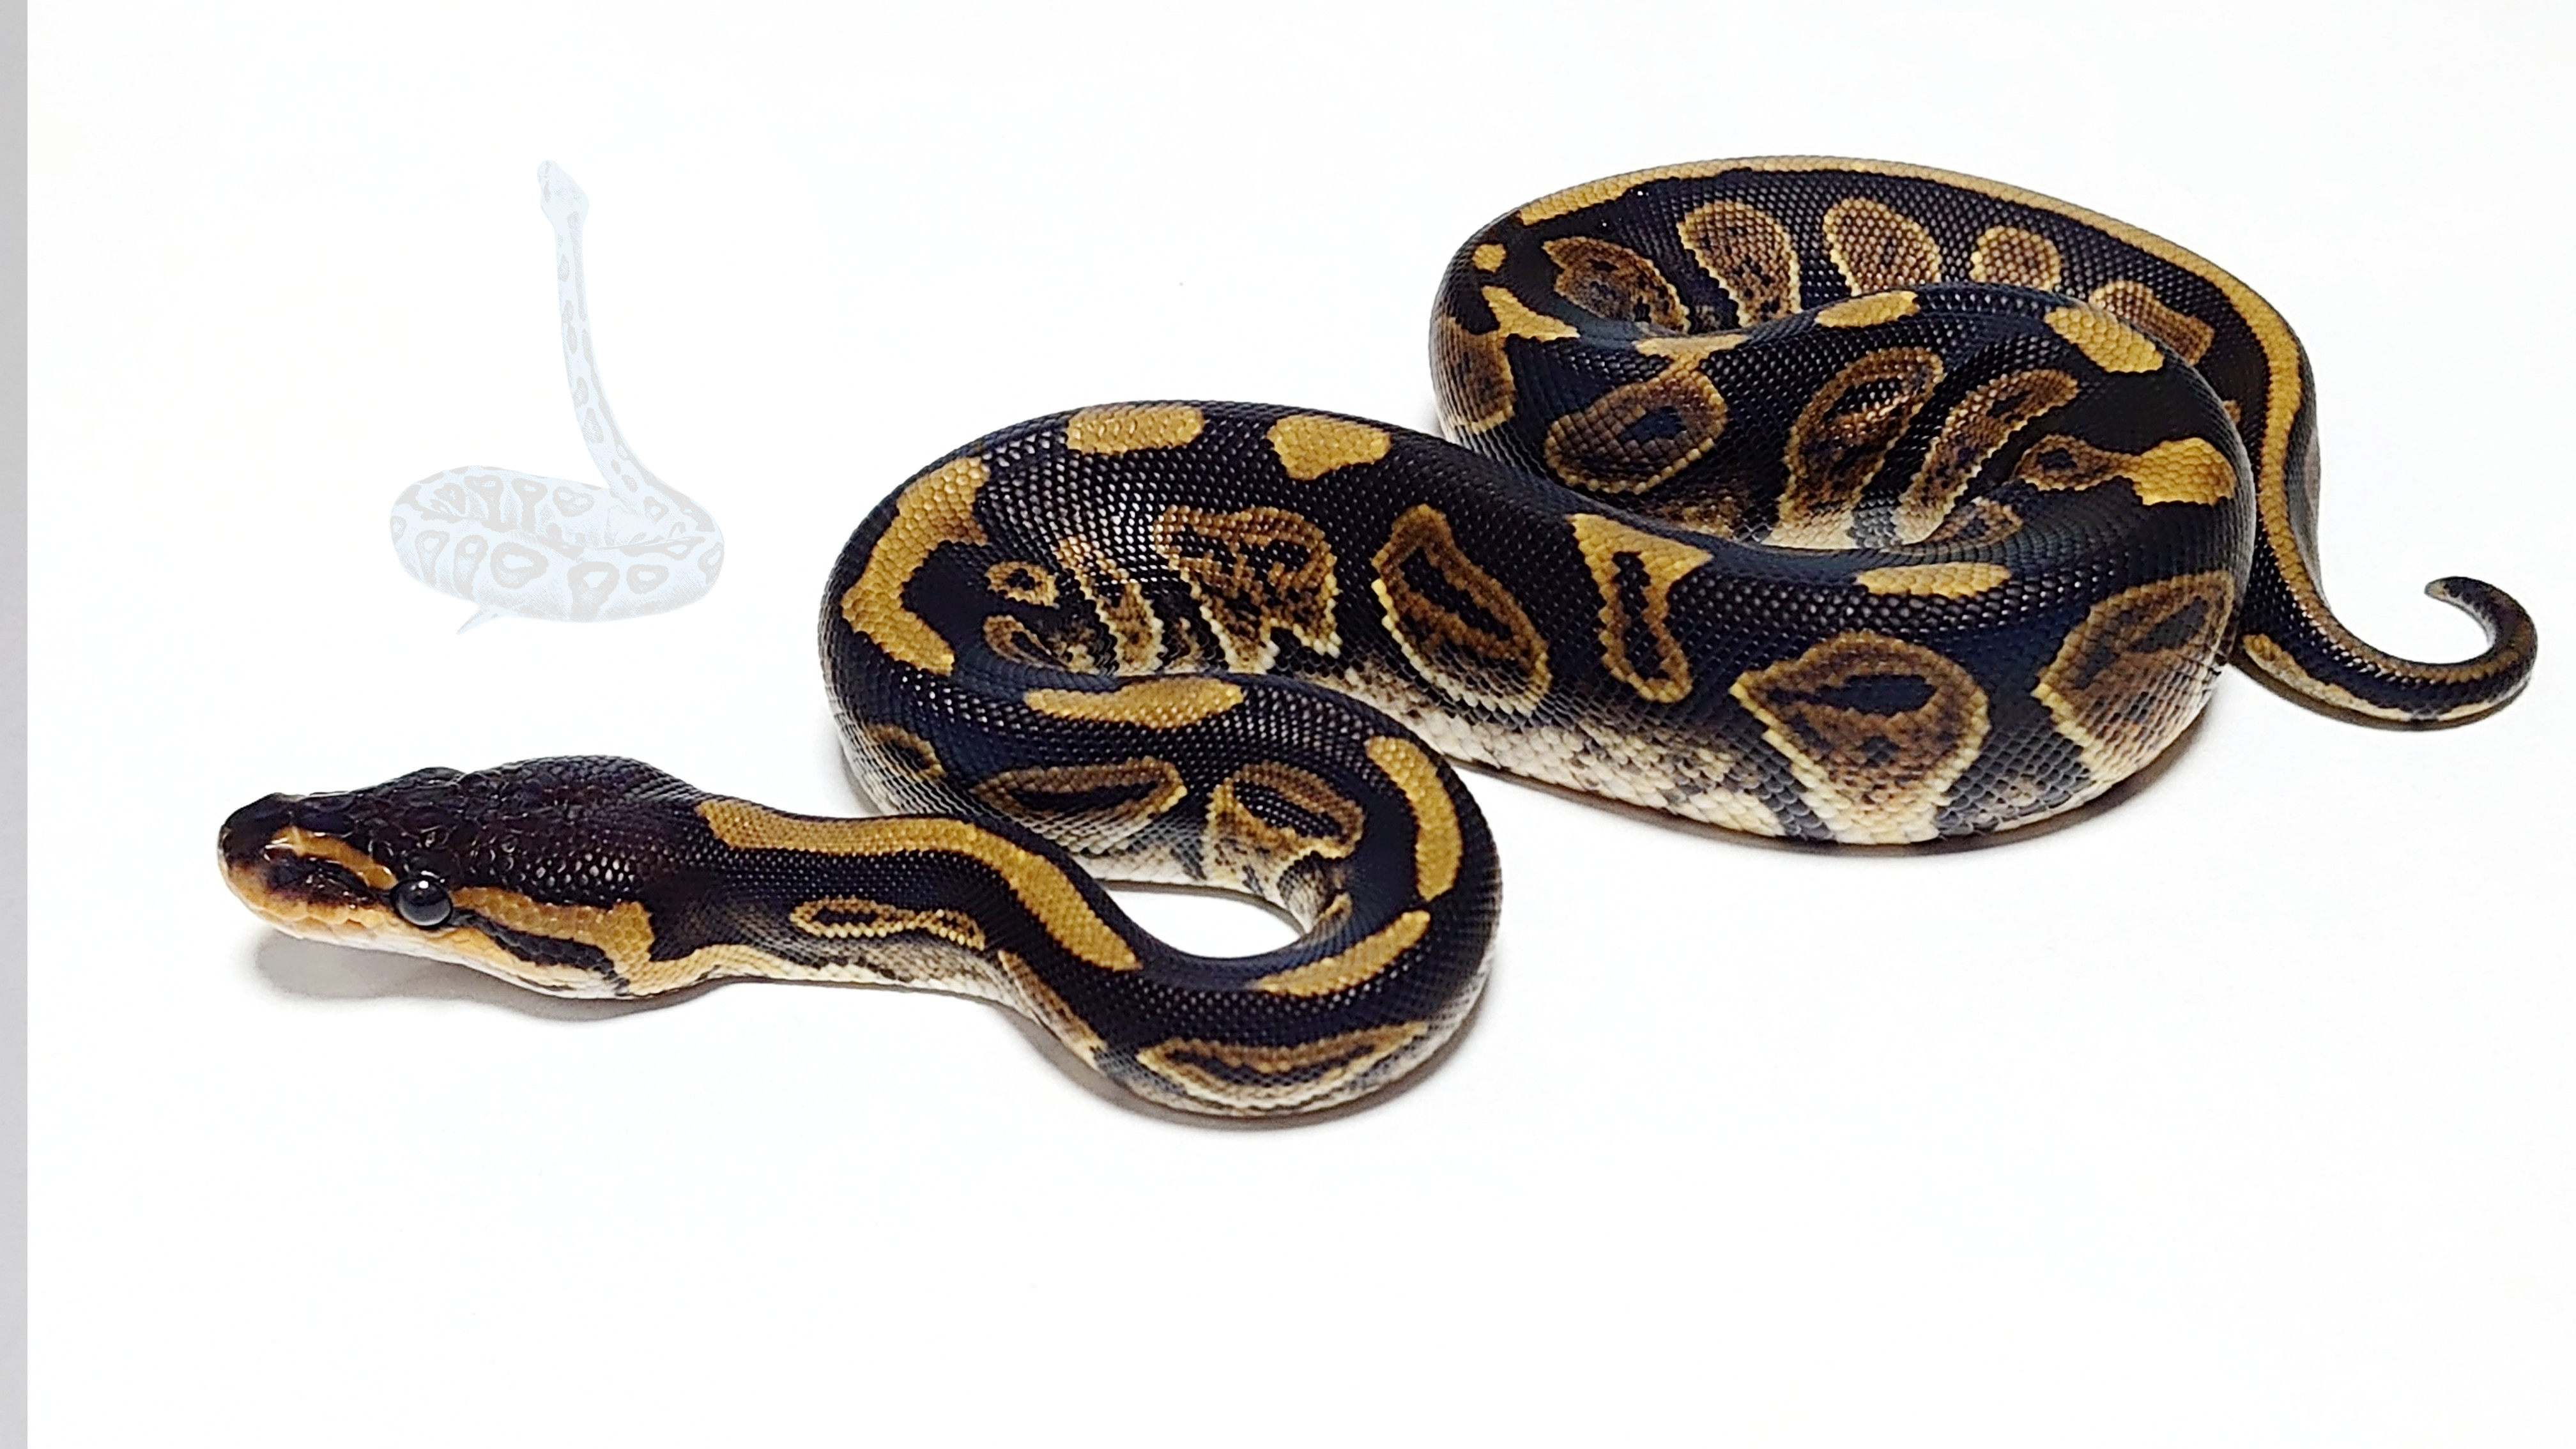 Wookie Female Ball Python by The Collectors Reptiles